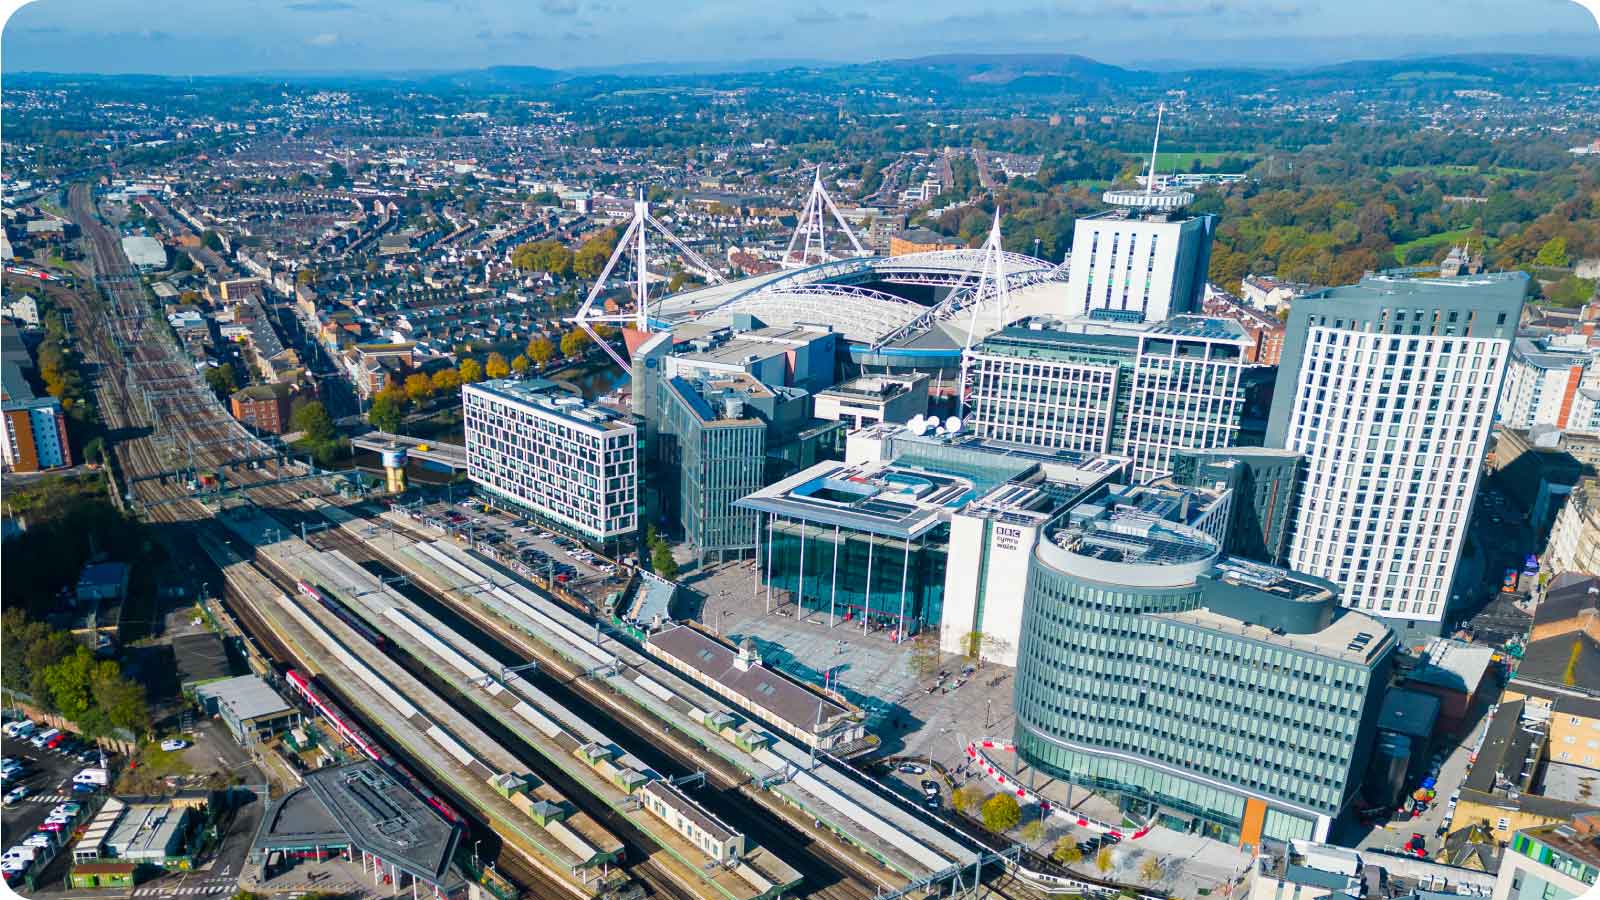 Aerial image of Cardiff central